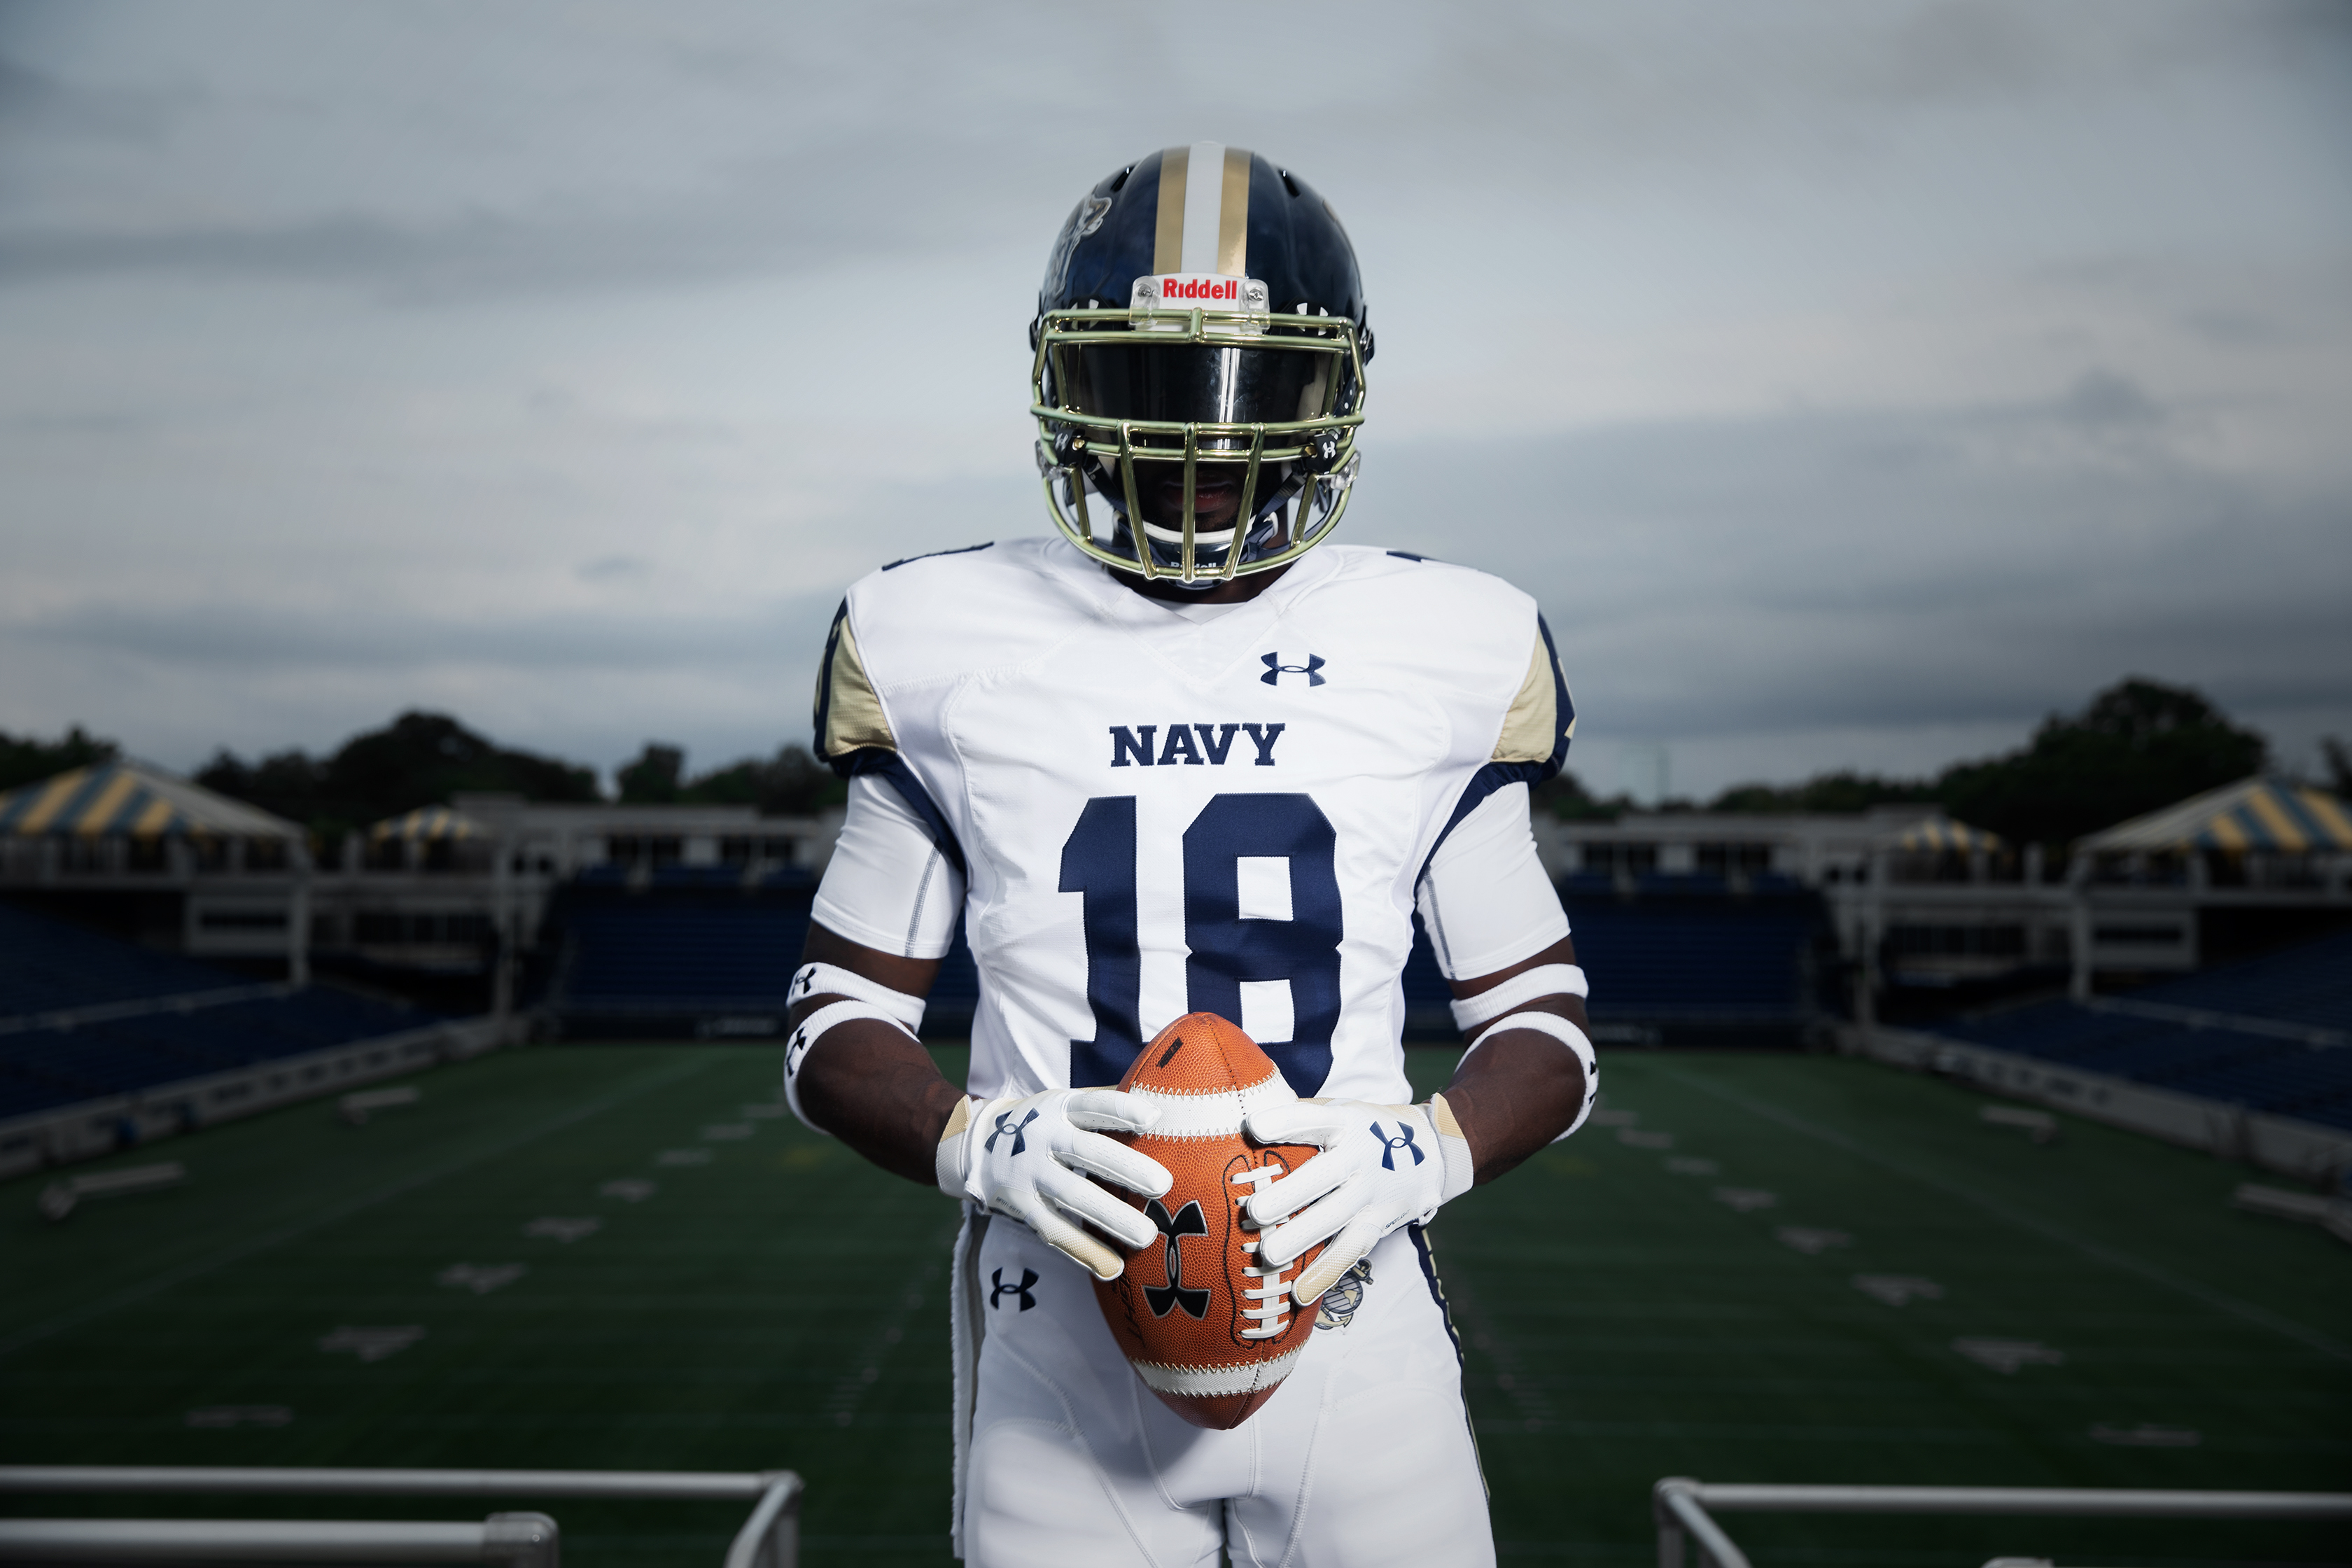 Navy dumps military uniform that Padres based new military